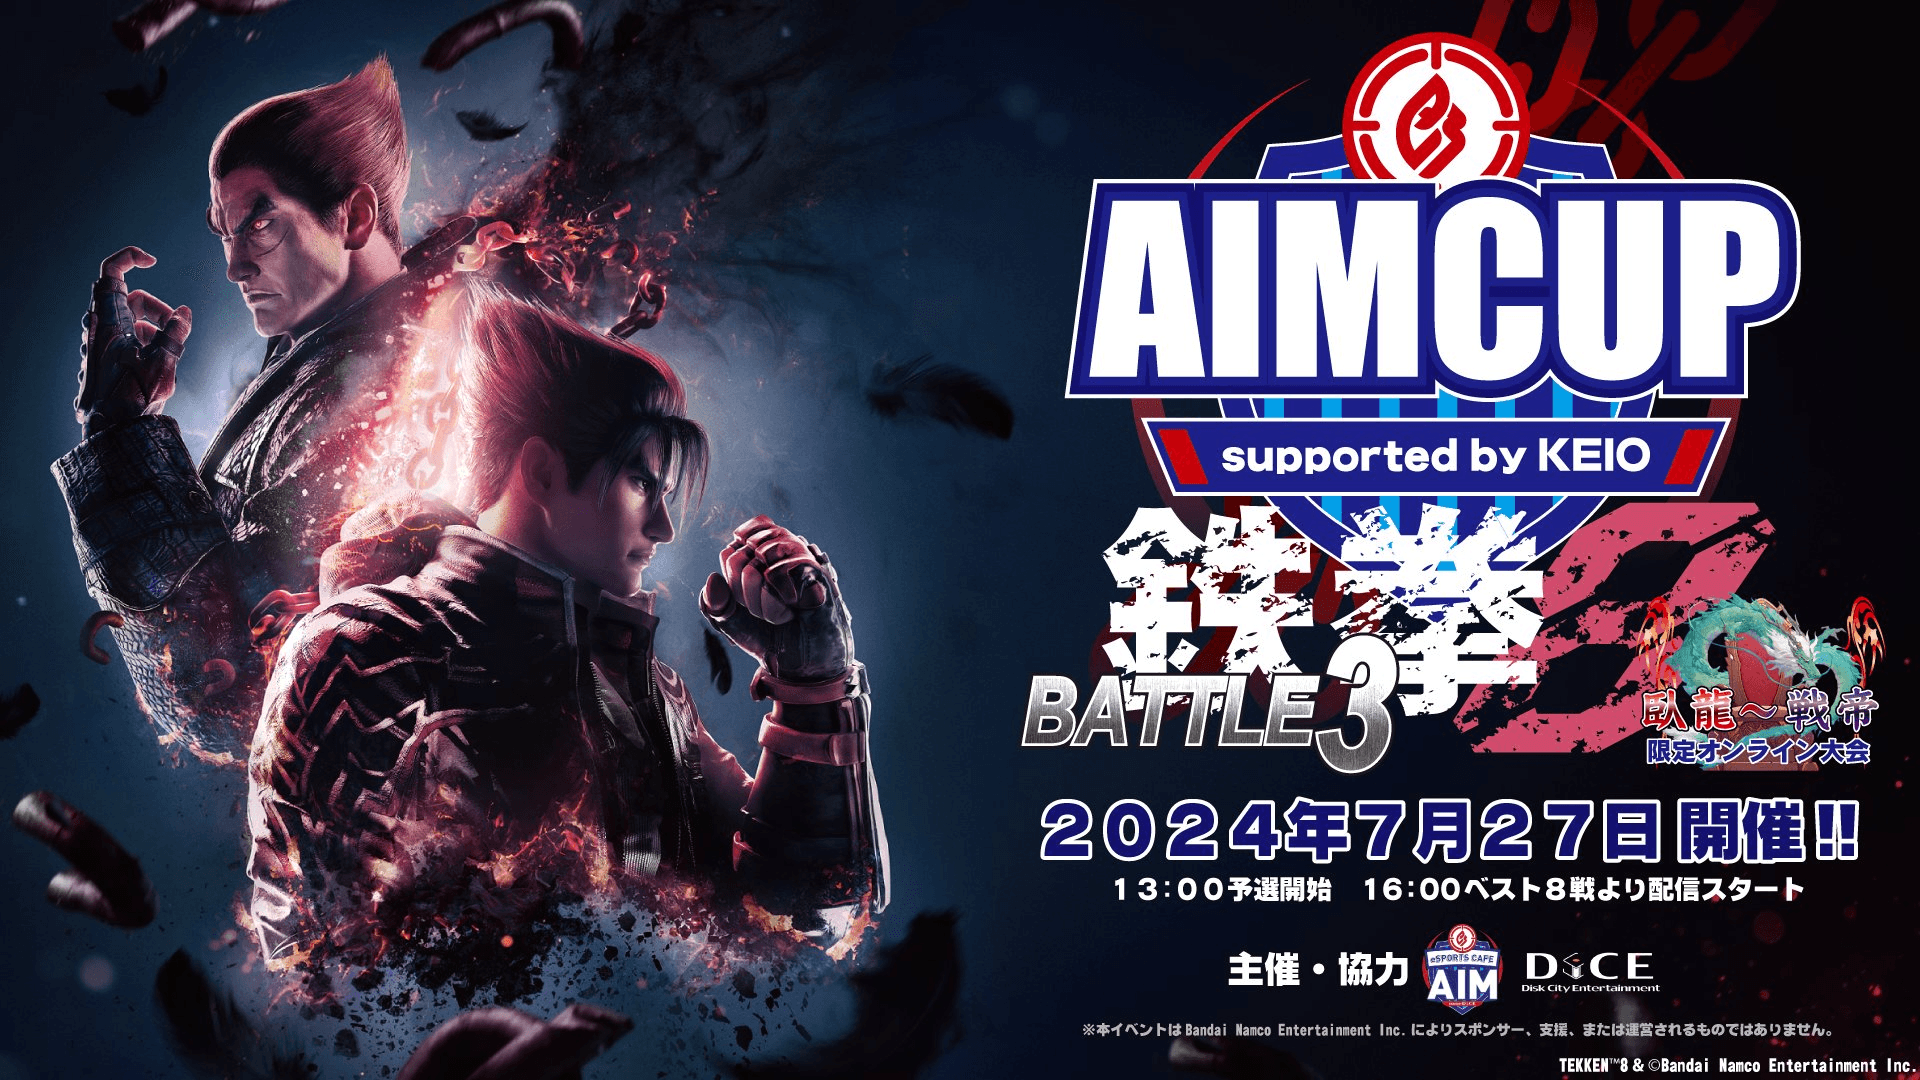 AIMCUP -supported by KEIO- 鉄拳8 BATTLE3 feature image